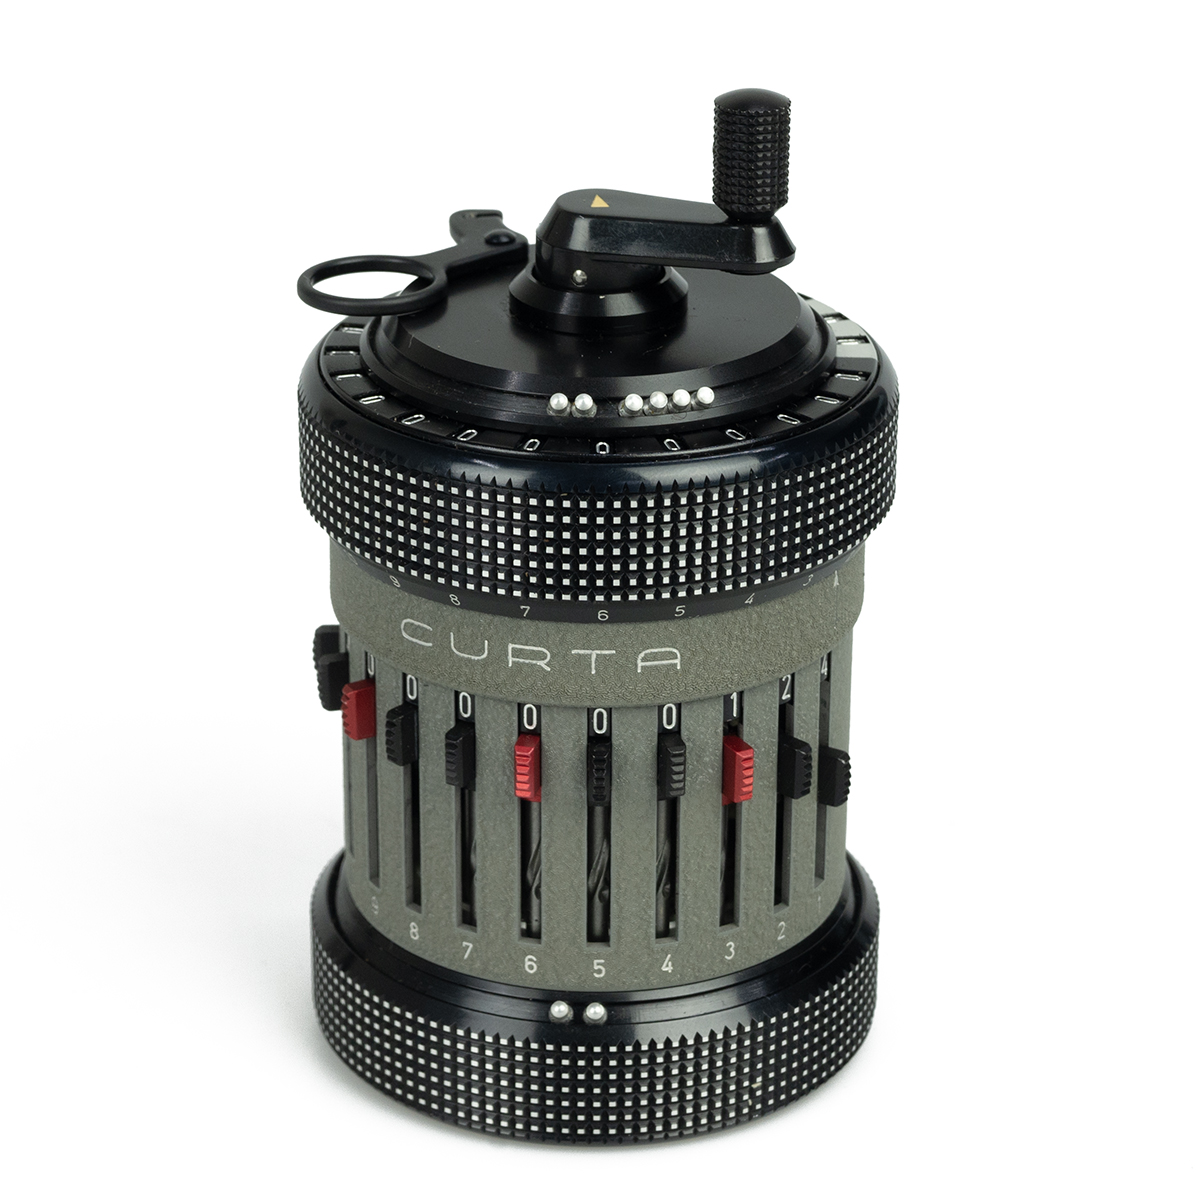 Curta II calculator serial 535150 manufactured March 1966. Black and grey body with black plastic...